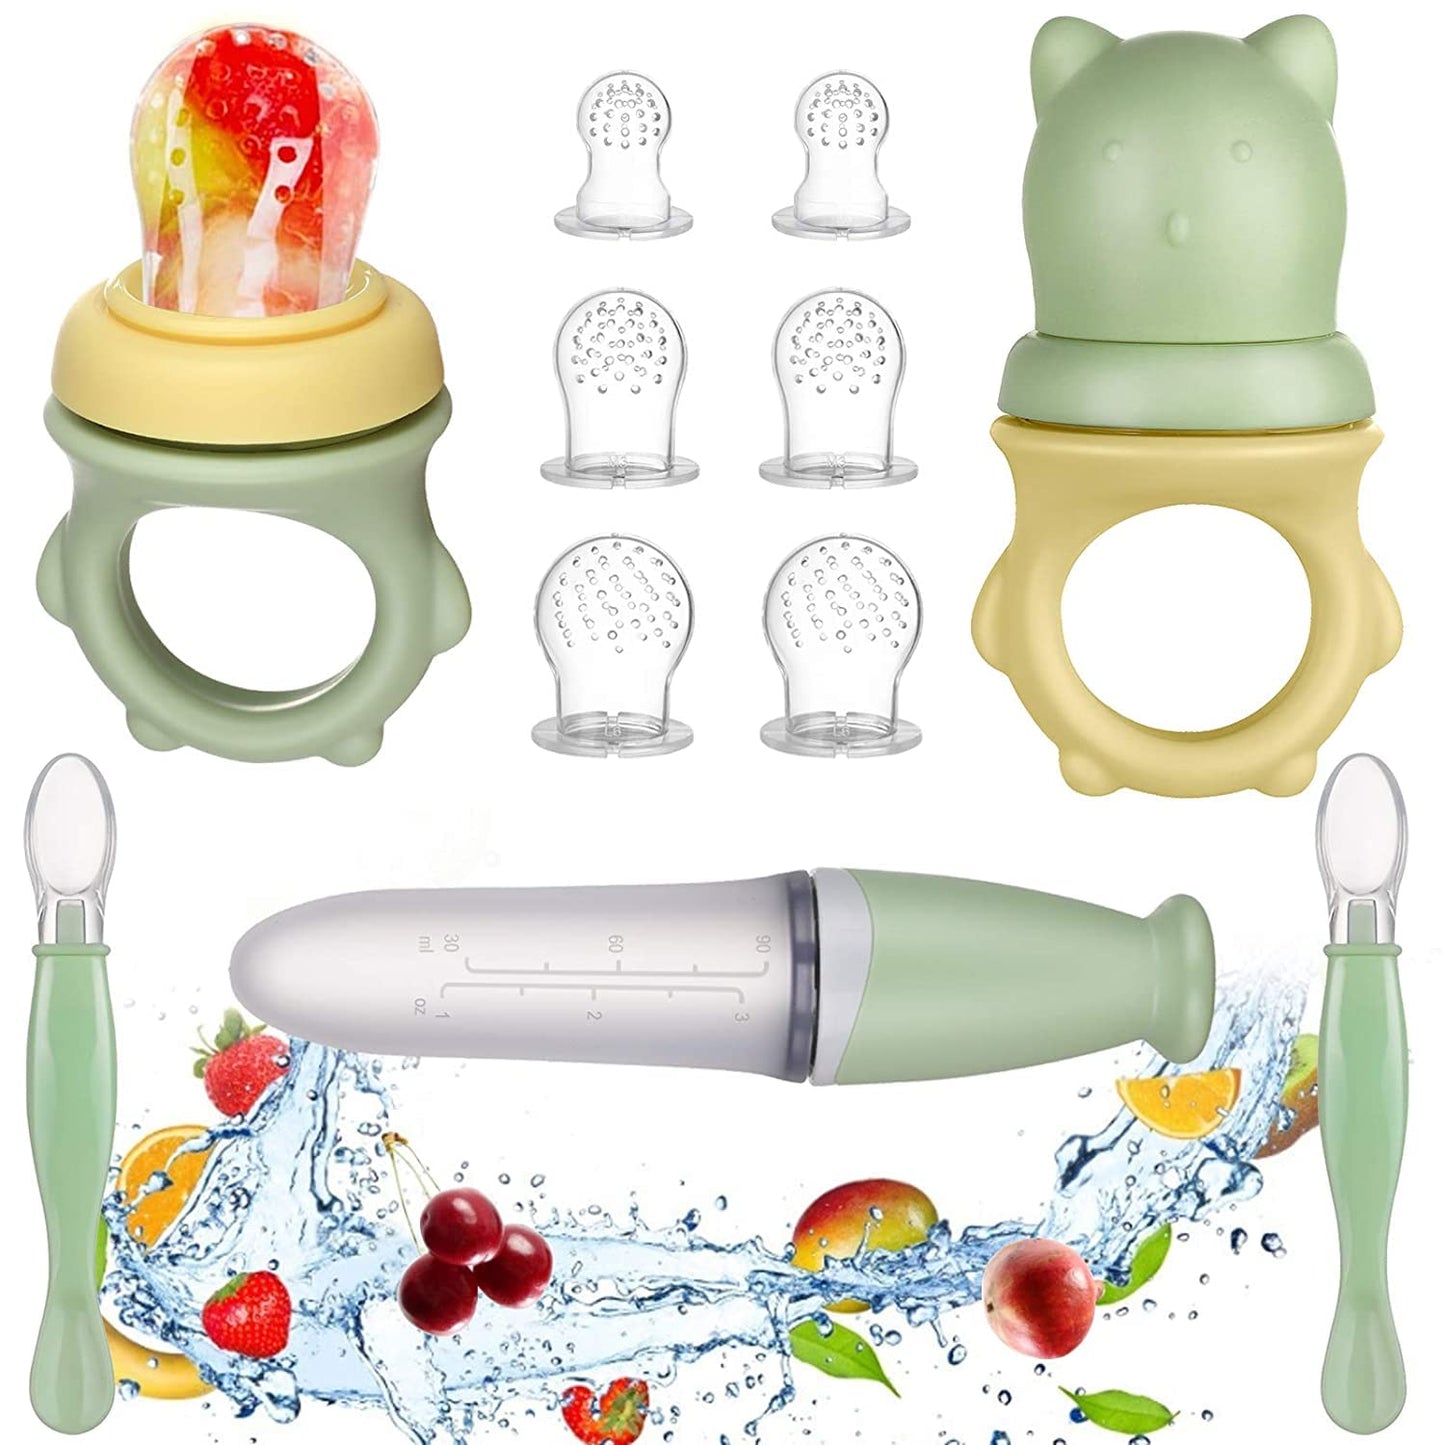 Lictin Baby Food Feeder Pacifier Set Feeding Supplies 11 Pcs - Squeeze Spoon with Fresh Silicone Bottle, Infant Hot Safety Spoon, Baby Feeding Utensil Gift Box